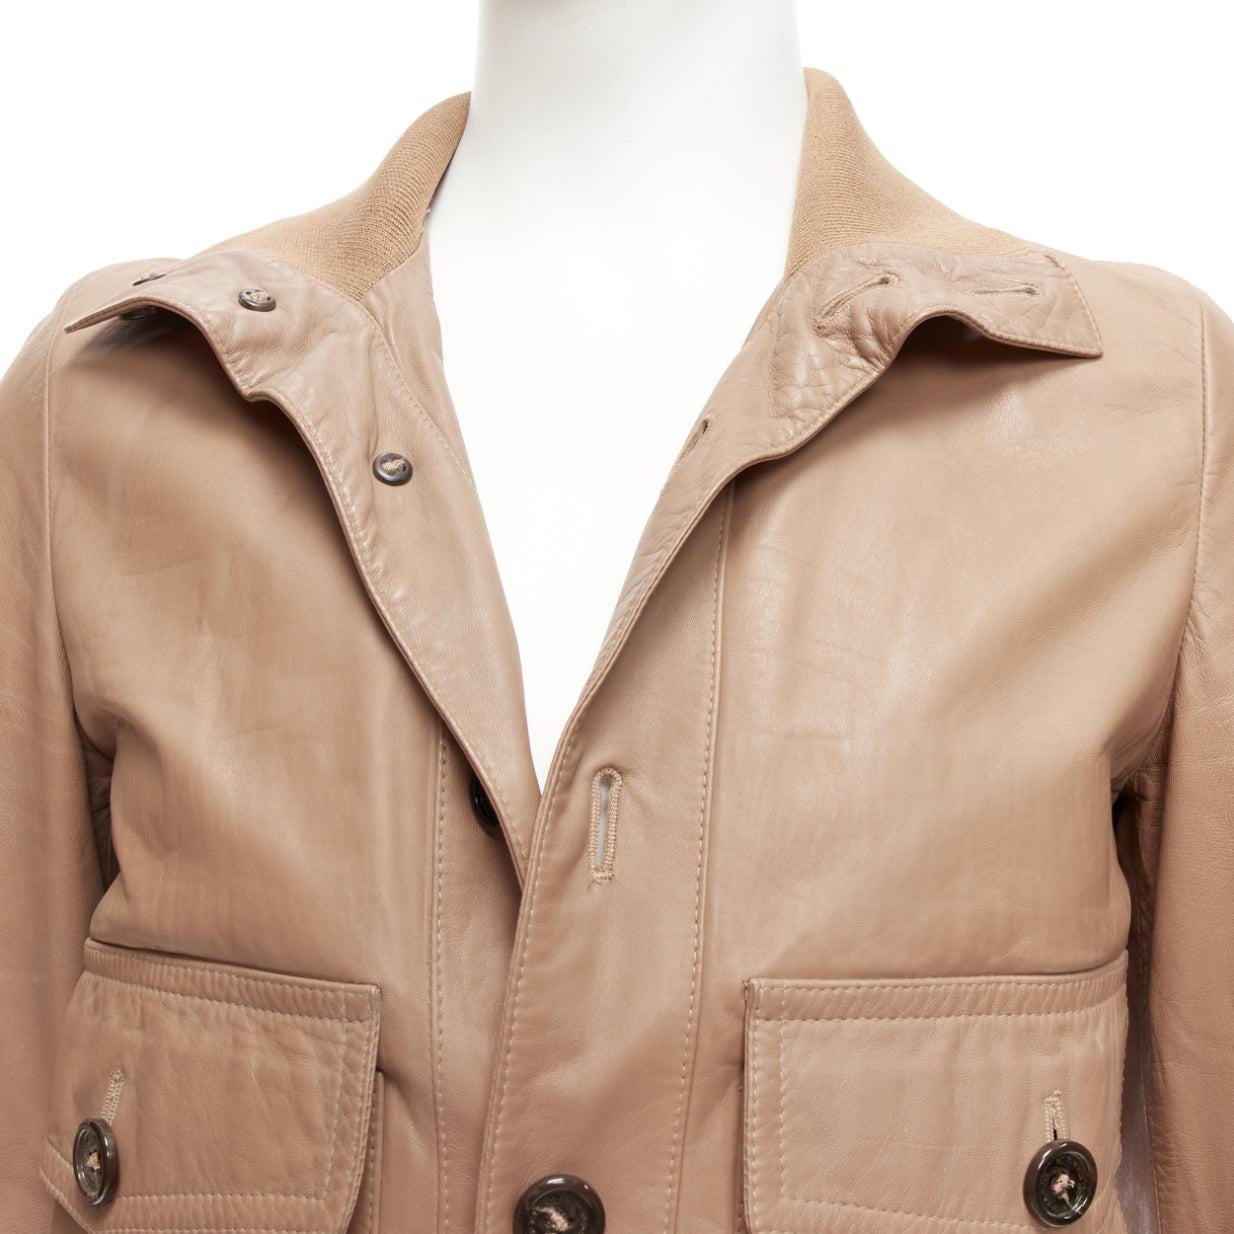 BURBERRY brown lambskin leather ribbed hem collar aviator bomber jacket IT46 S
Reference: MLCO/A00002
Brand: Burberry
Material: Leather
Color: Brown
Pattern: Solid
Closure: Button
Lining: Beige Fabric
Made in: Italy

CONDITION:
Condition: Good, this